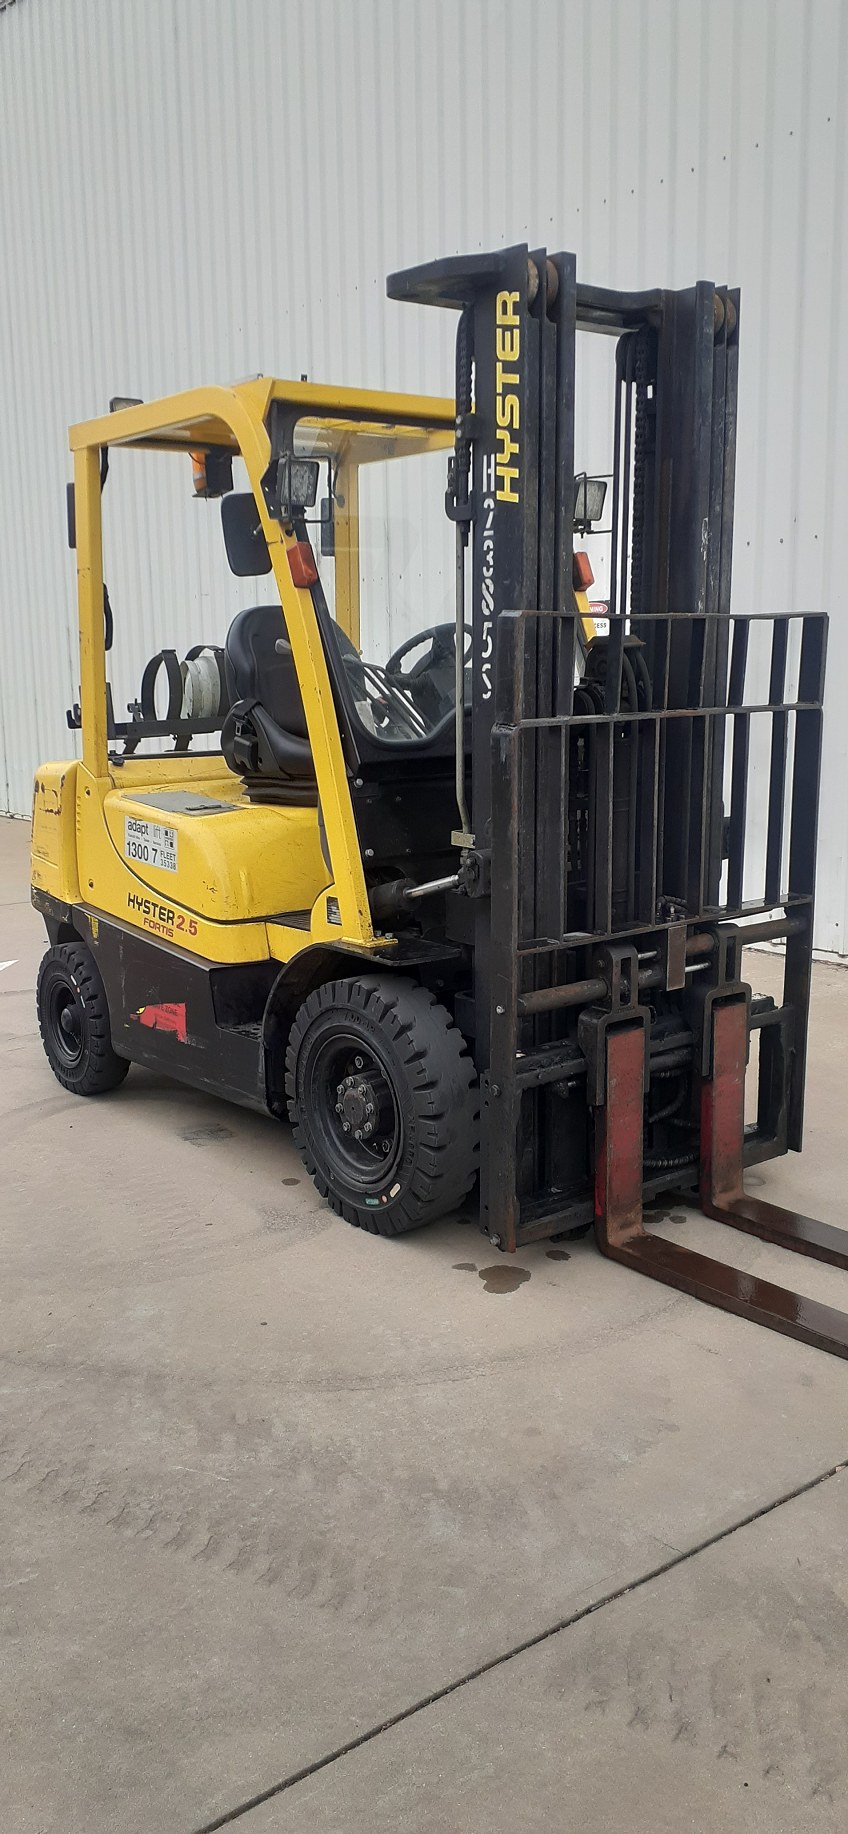 HYSTER H2.5TX